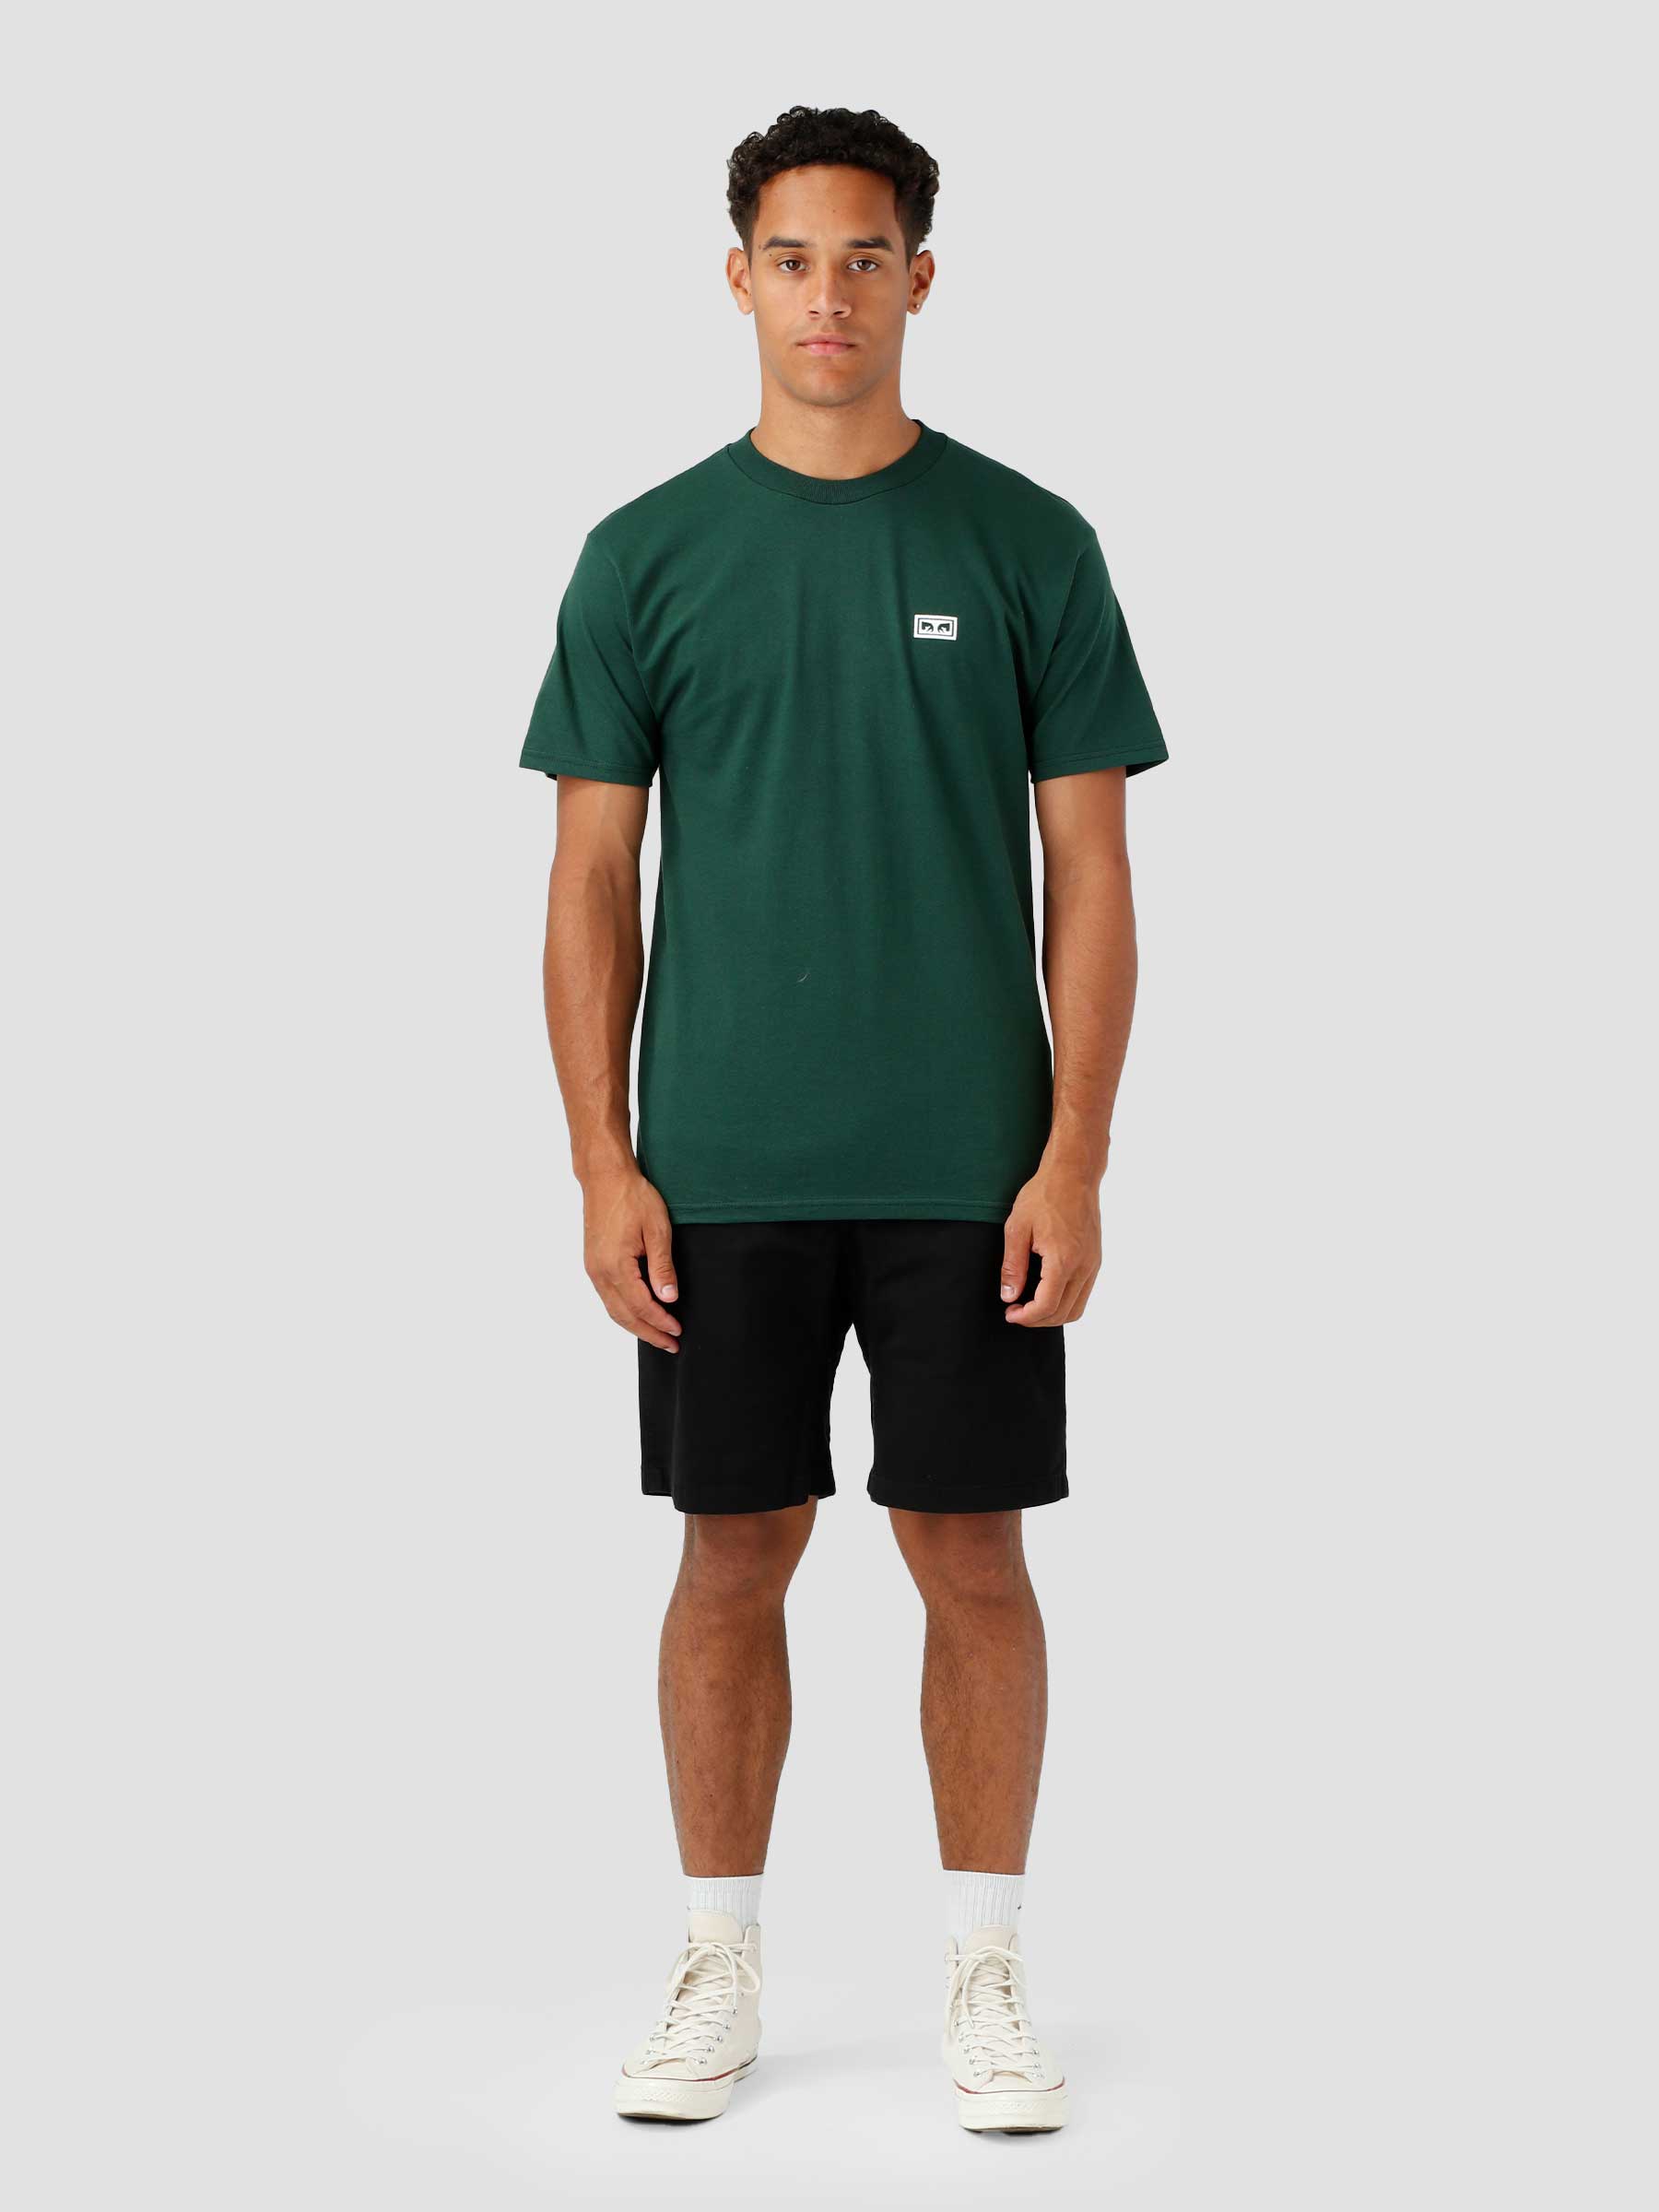 Obey Eyes 3 T-shirt Forest Green 165261826